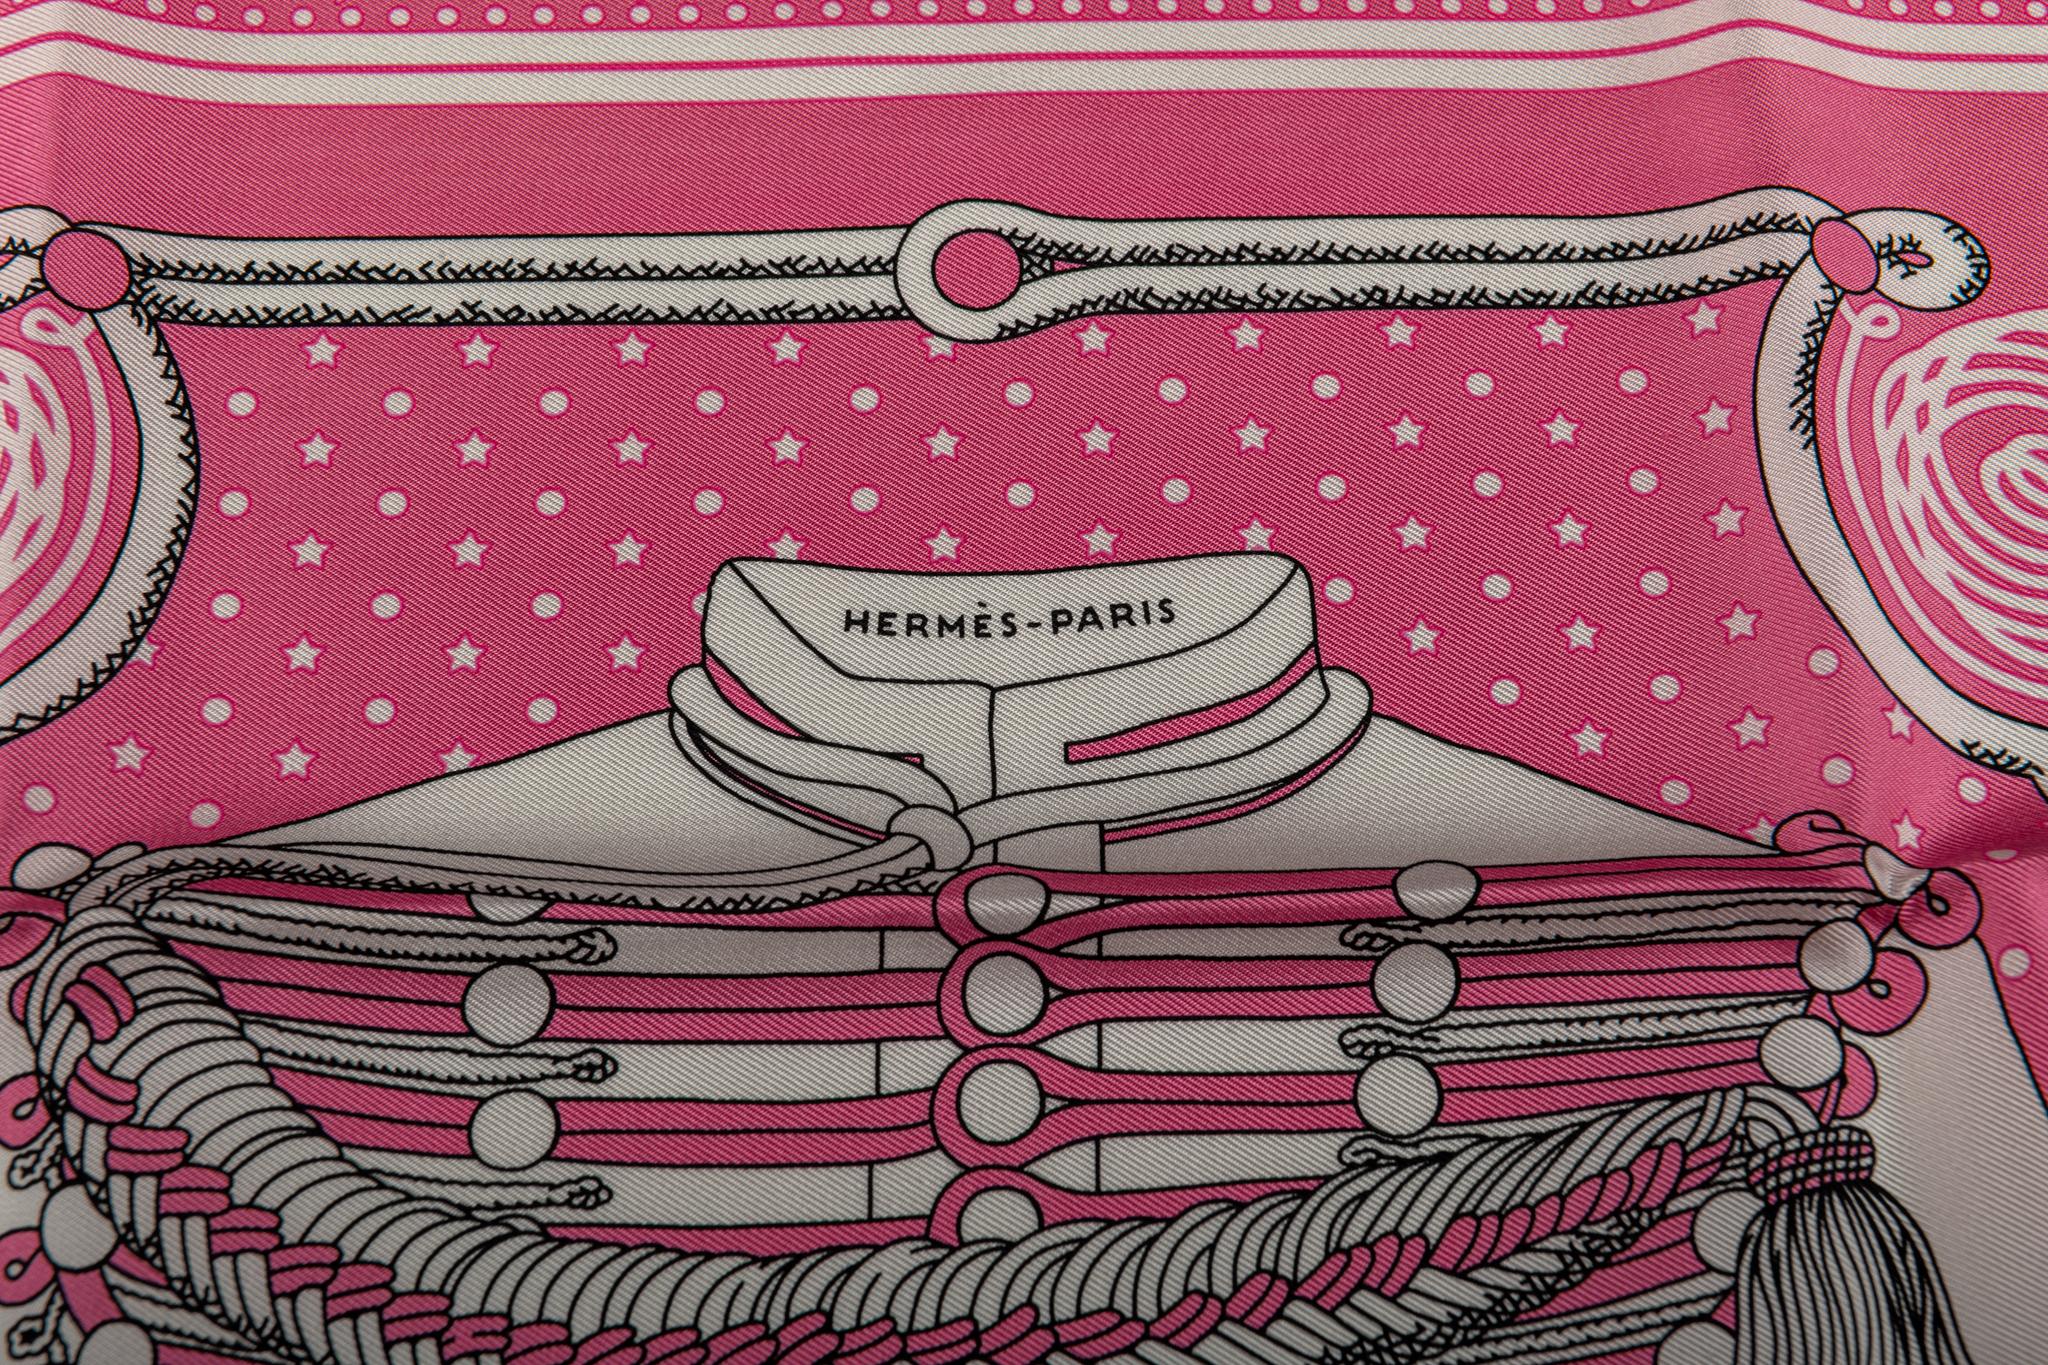 Hermès 2020 limited edition Brandebourg bandana scarf. Pink and white combo. 100% pure silk. Brand new in original box.